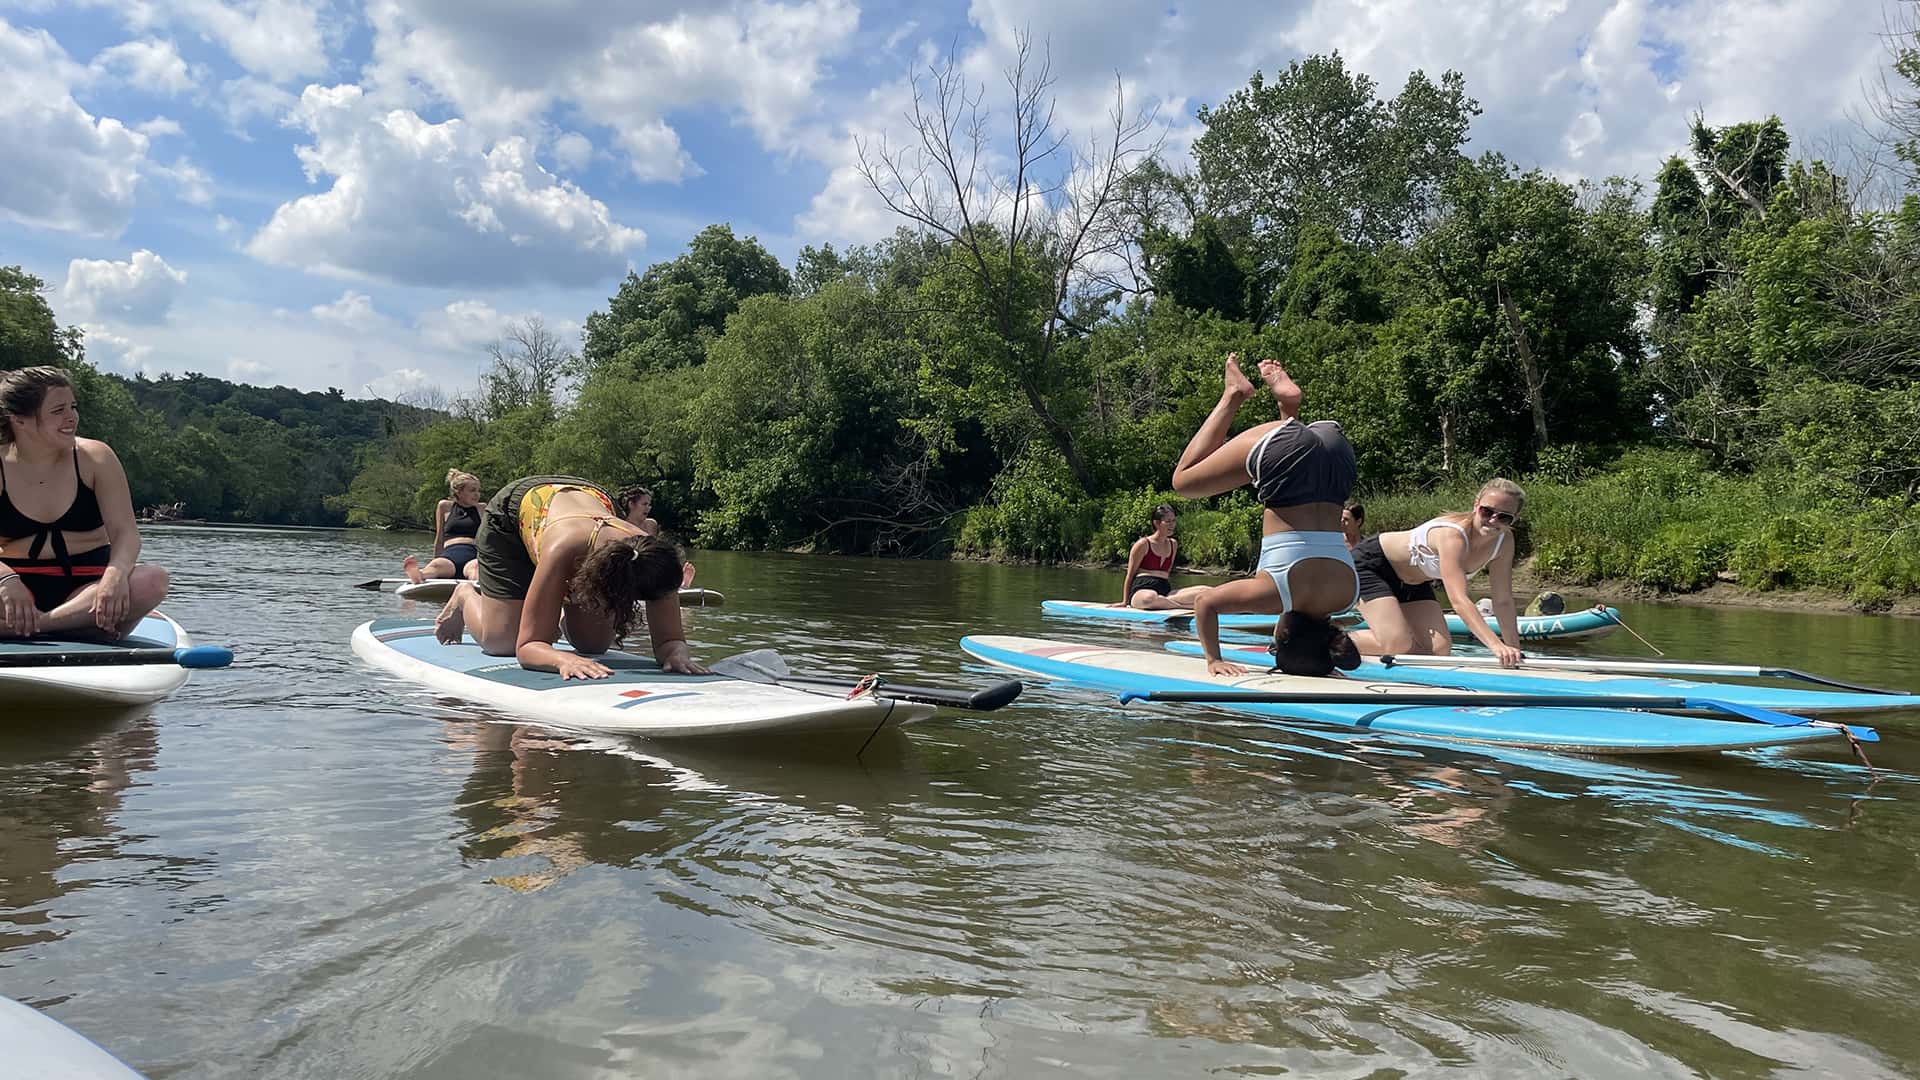 Stand up paddle board yoga class with Asheville Wellness Tours on the French Broad River.